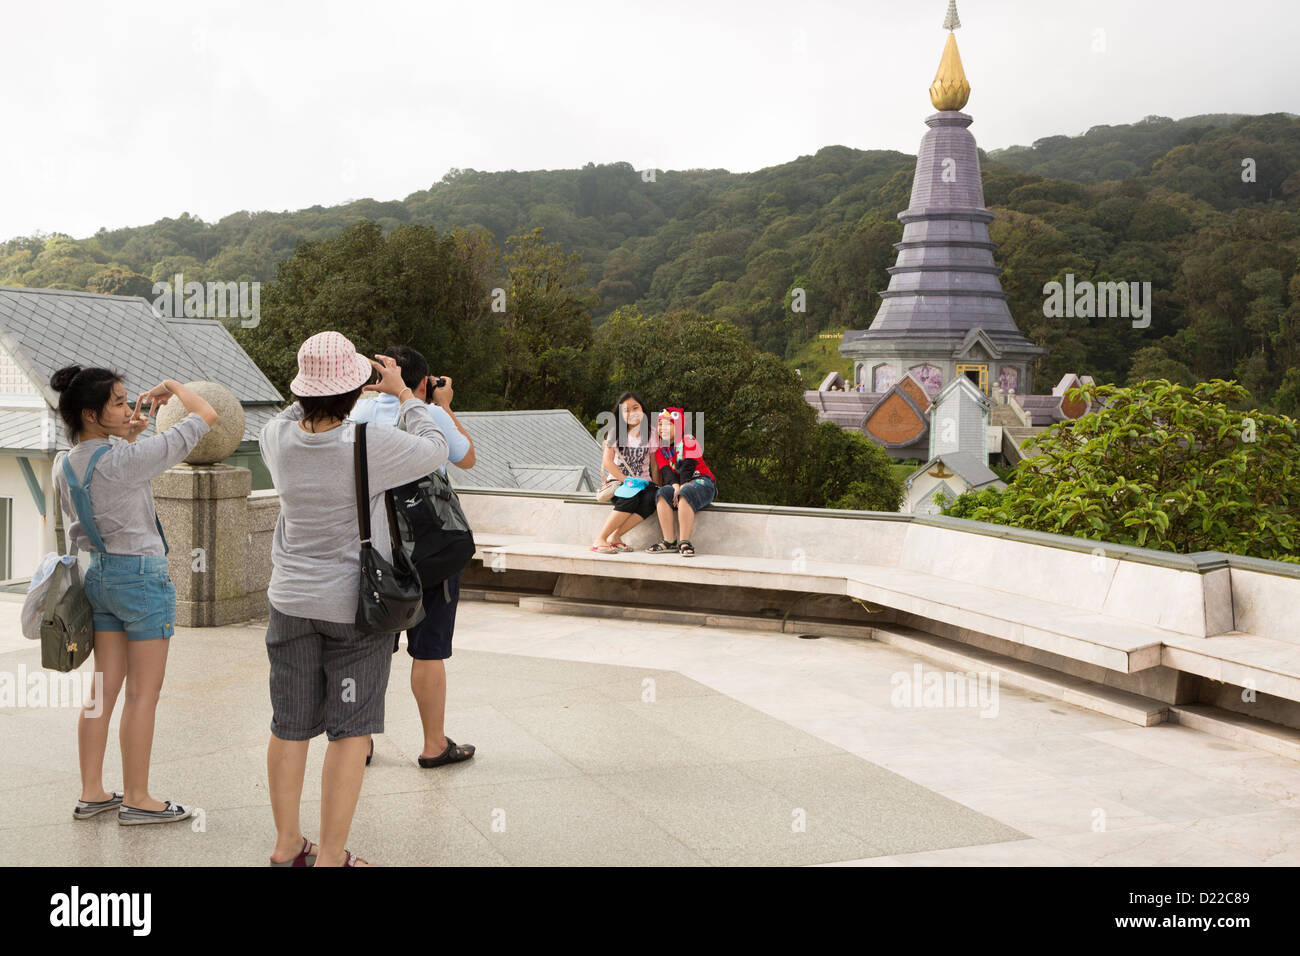 Asian tourists posing in front of the Naphaphonphumisiri Chedi on the top of Doi Inthanon, the highest mountain in Thailand Stock Photo